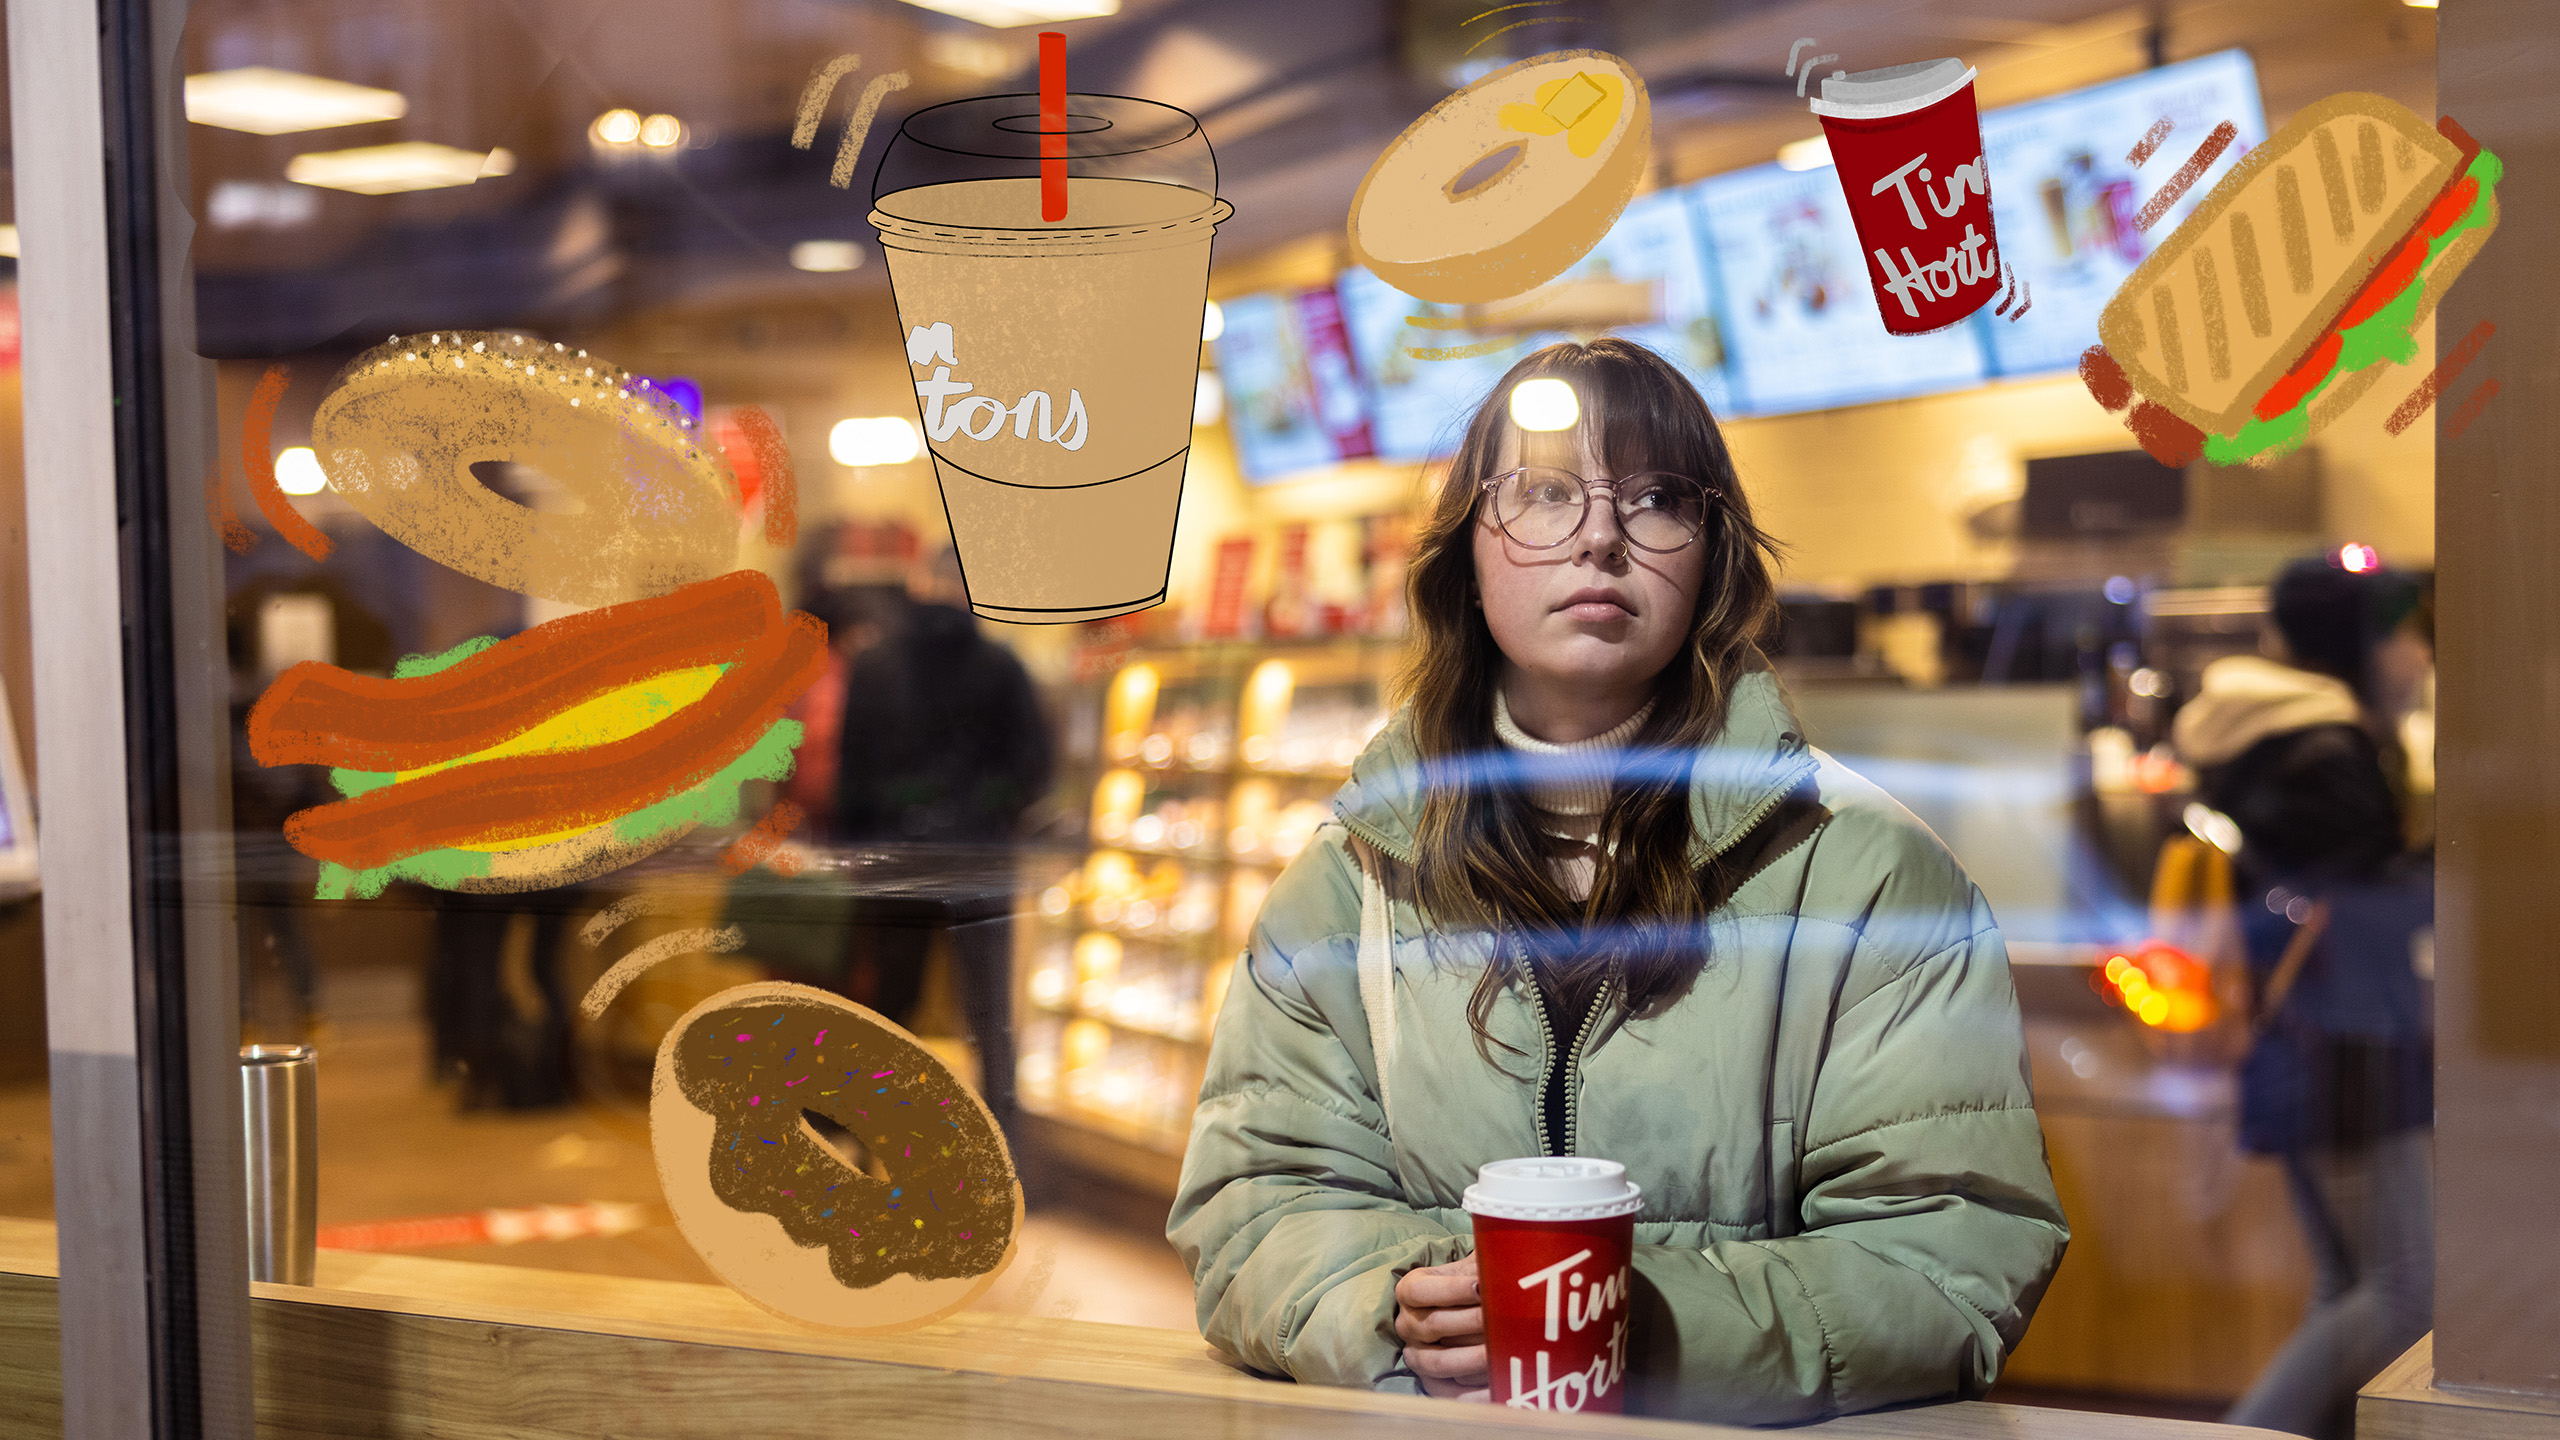 A girl sits behind the window of a Tim Hortons, looking sad. Surrounded by illustrations of food and drink